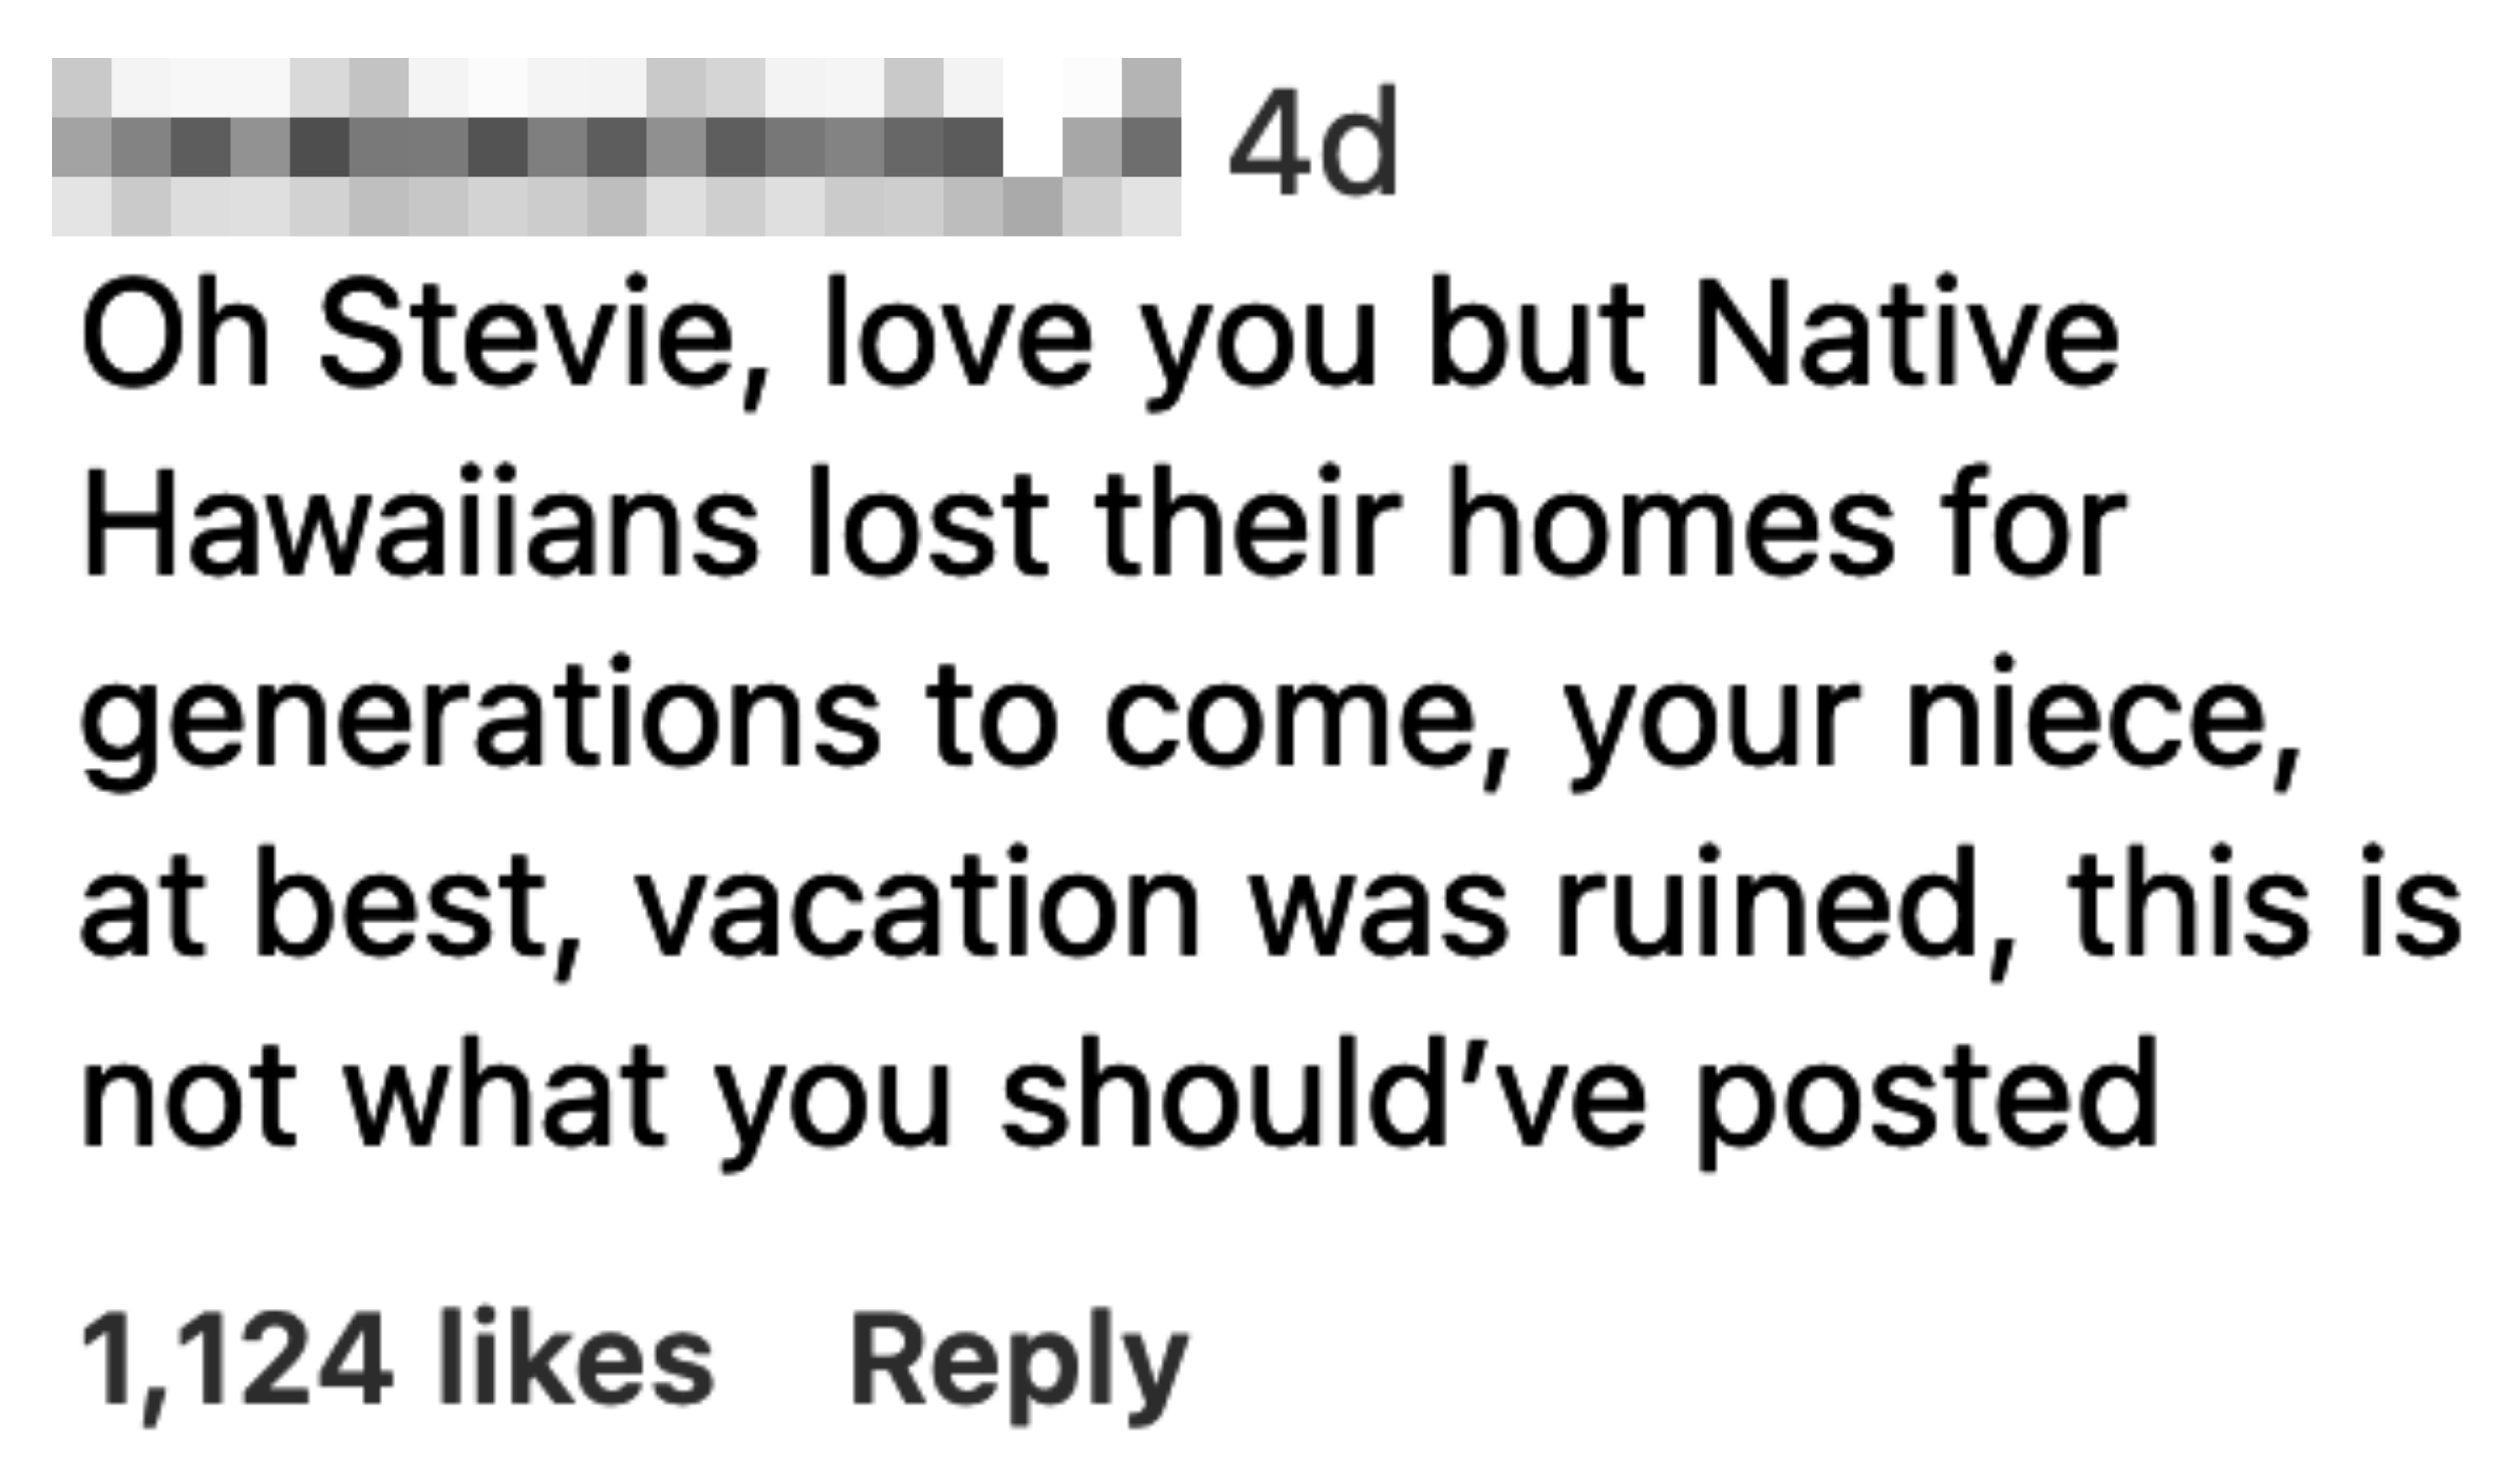 &quot;Oh Stevie, love you but Native Hawaiians lost their homes for generations to come, your niece, at best, vacation was ruined, this is not what you should&#x27;ve posted&quot;